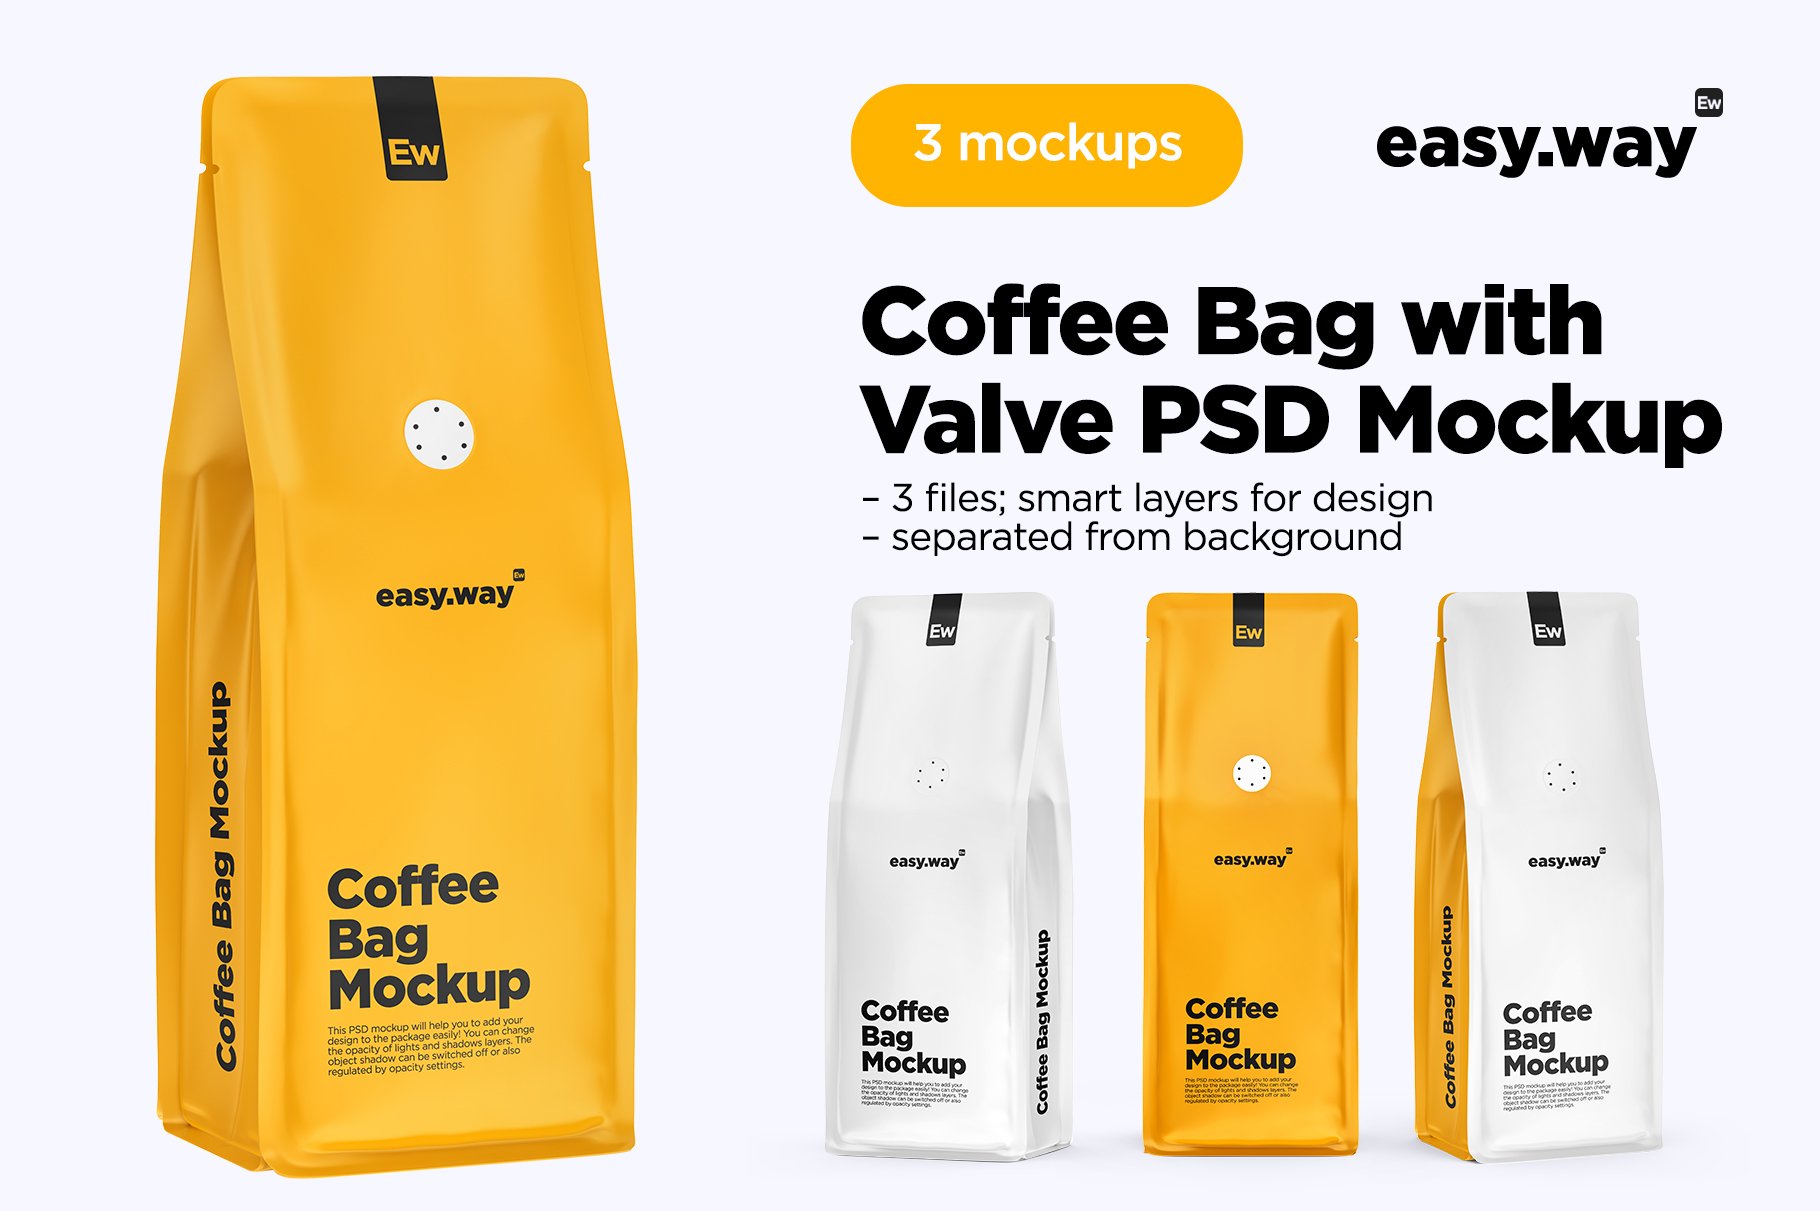 Coffee Bags with Valve PSD Mockups cover image.